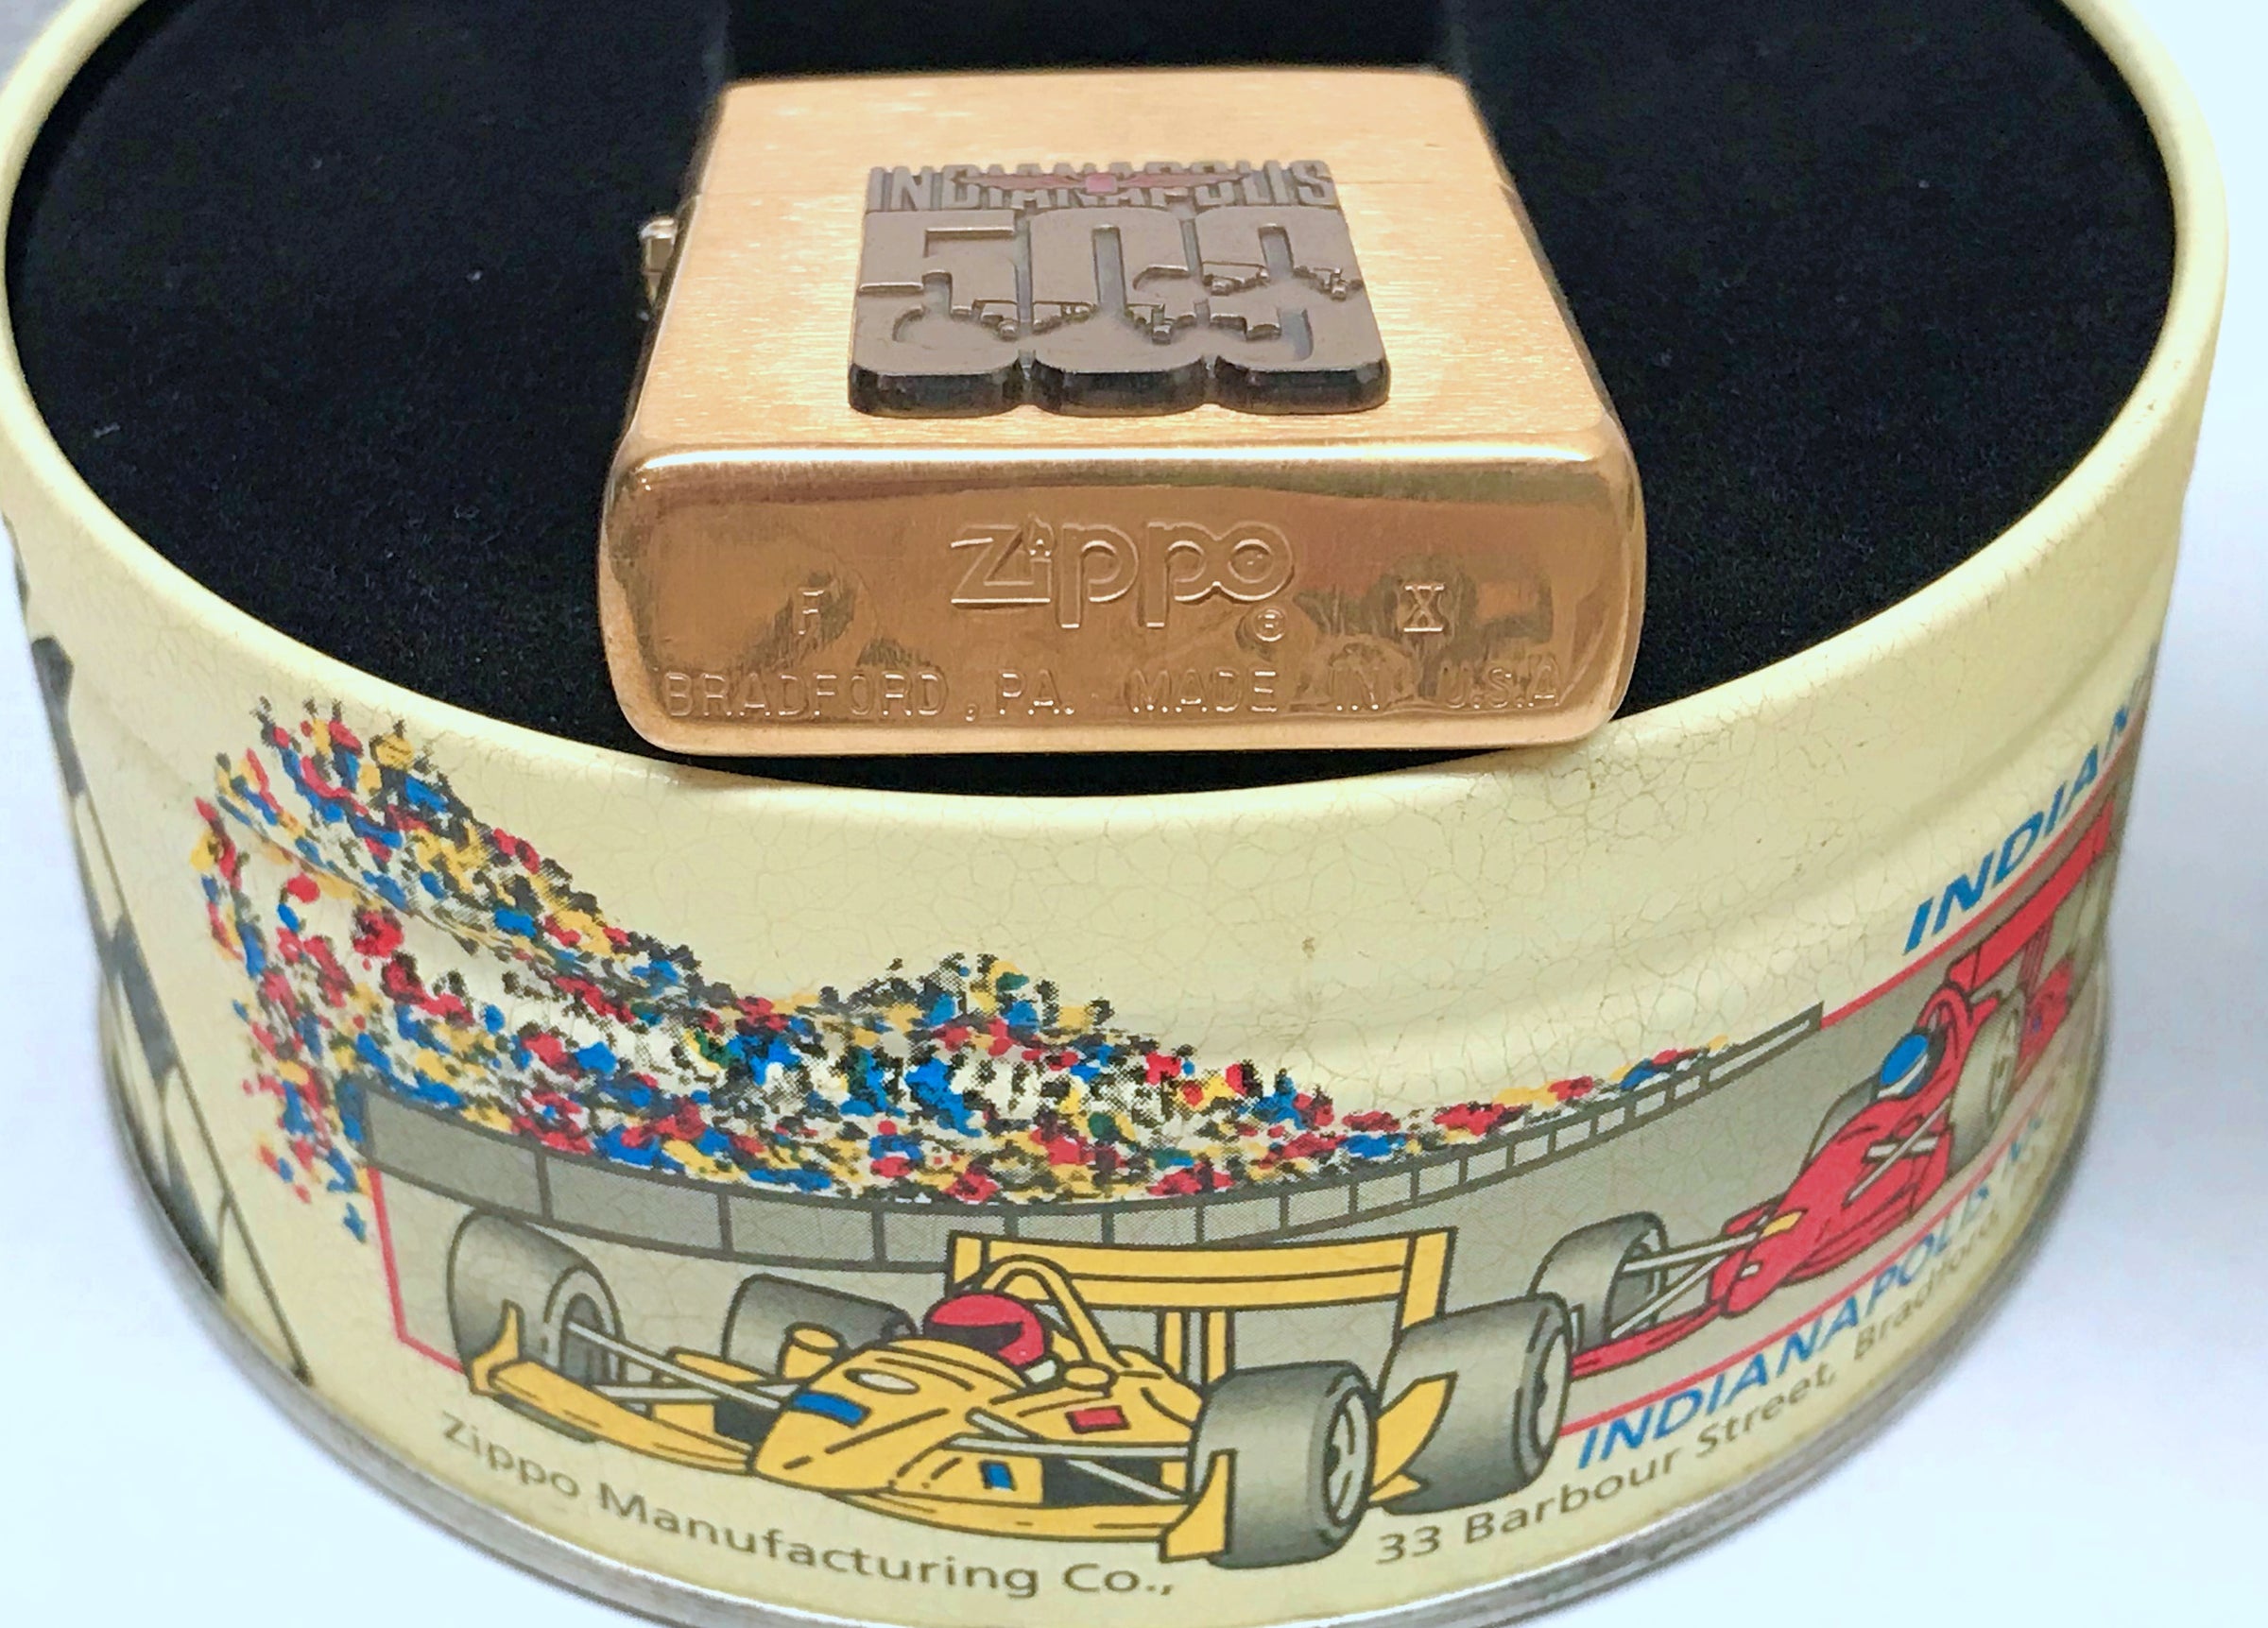 Zippo Lighter Collectors Set ~ 1994 Indianapolis 500 - Brickyard 400 Inaugural Lighters - Hers and His Treasures